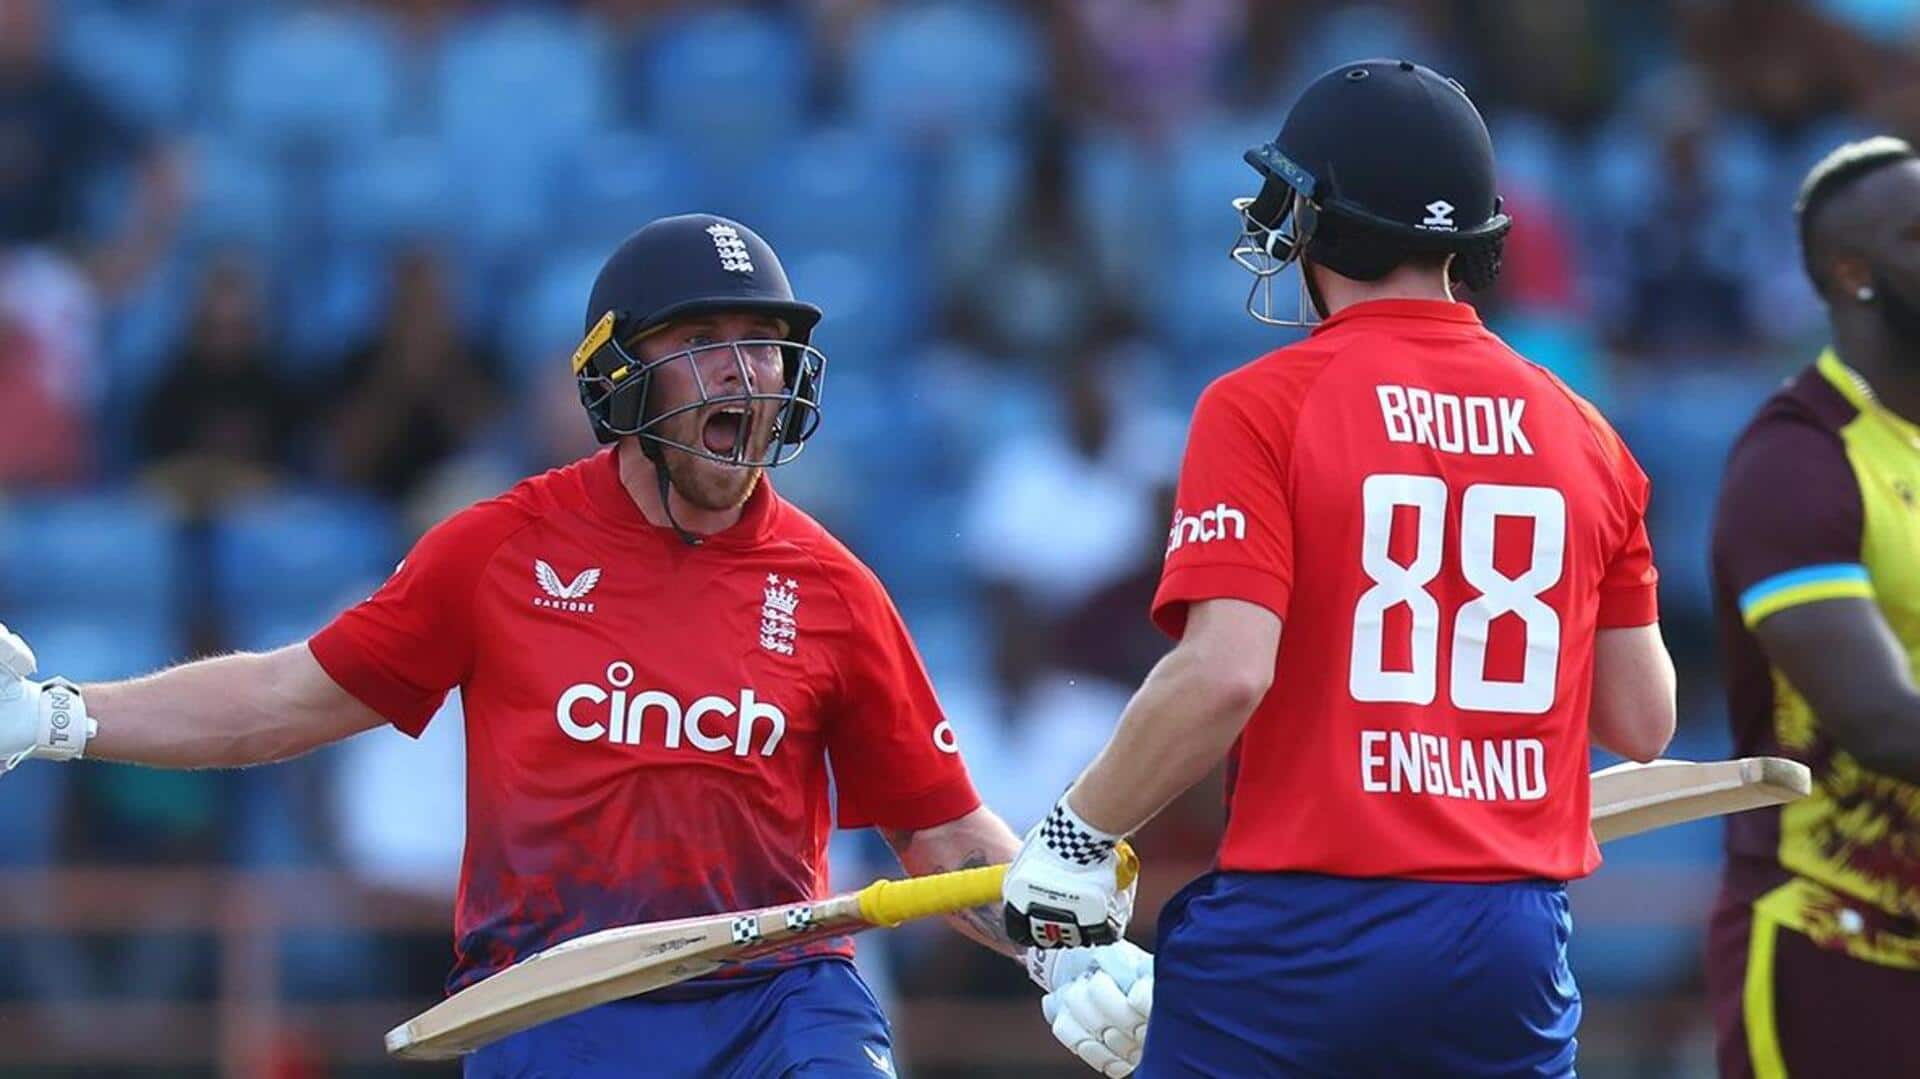 Philip Salt becomes England's fifth centurion in T20Is: Key stats